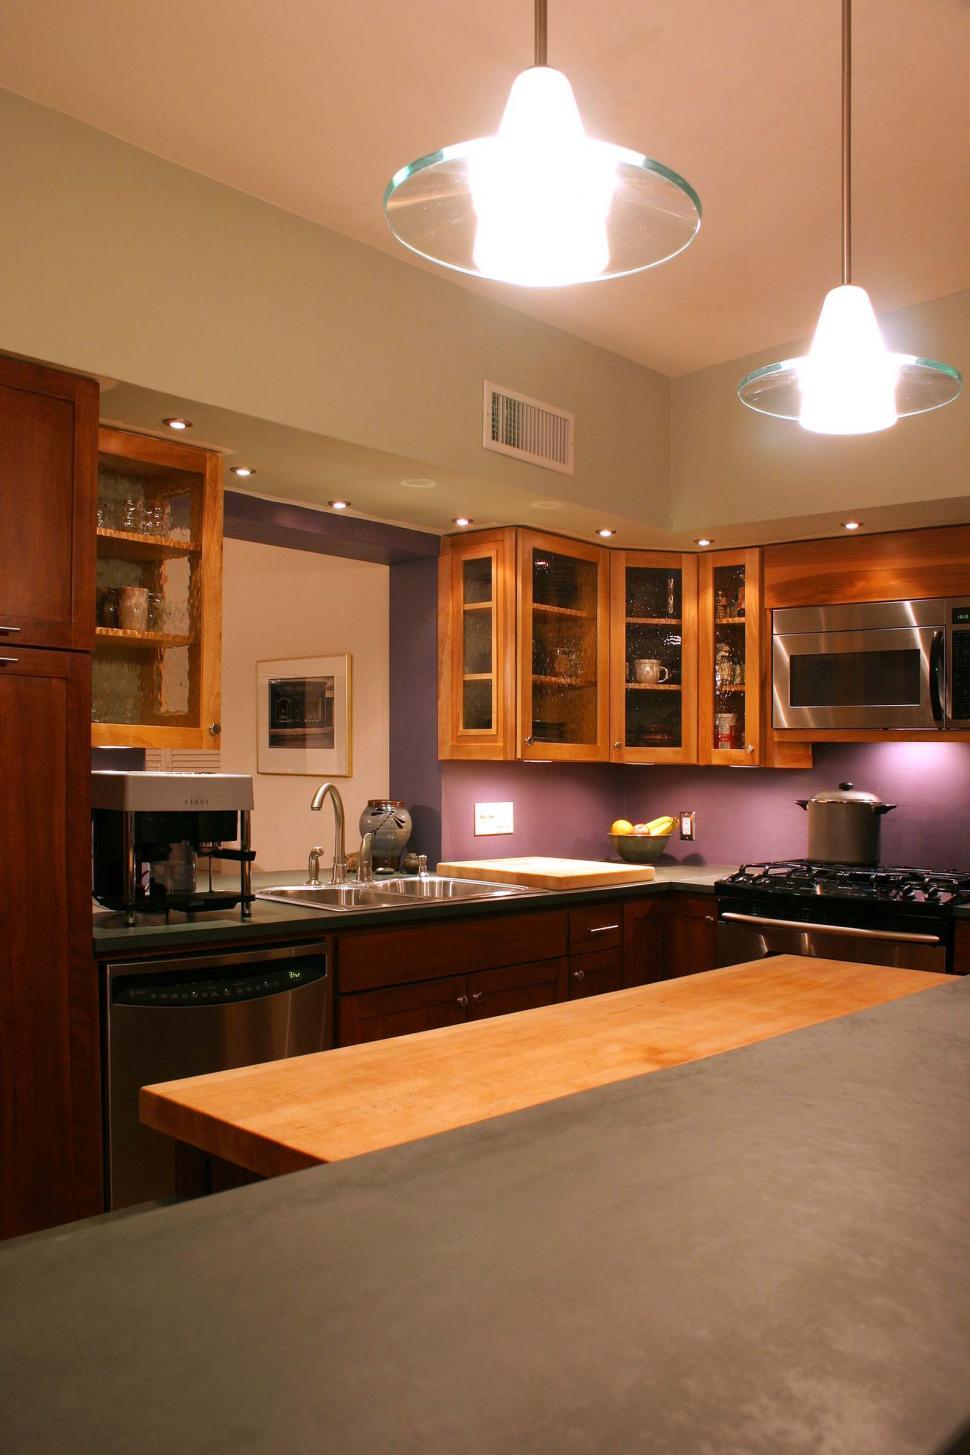 Free Image of Modern Kitchen With Wooden Cabinets and Stainless Steel Appliances 